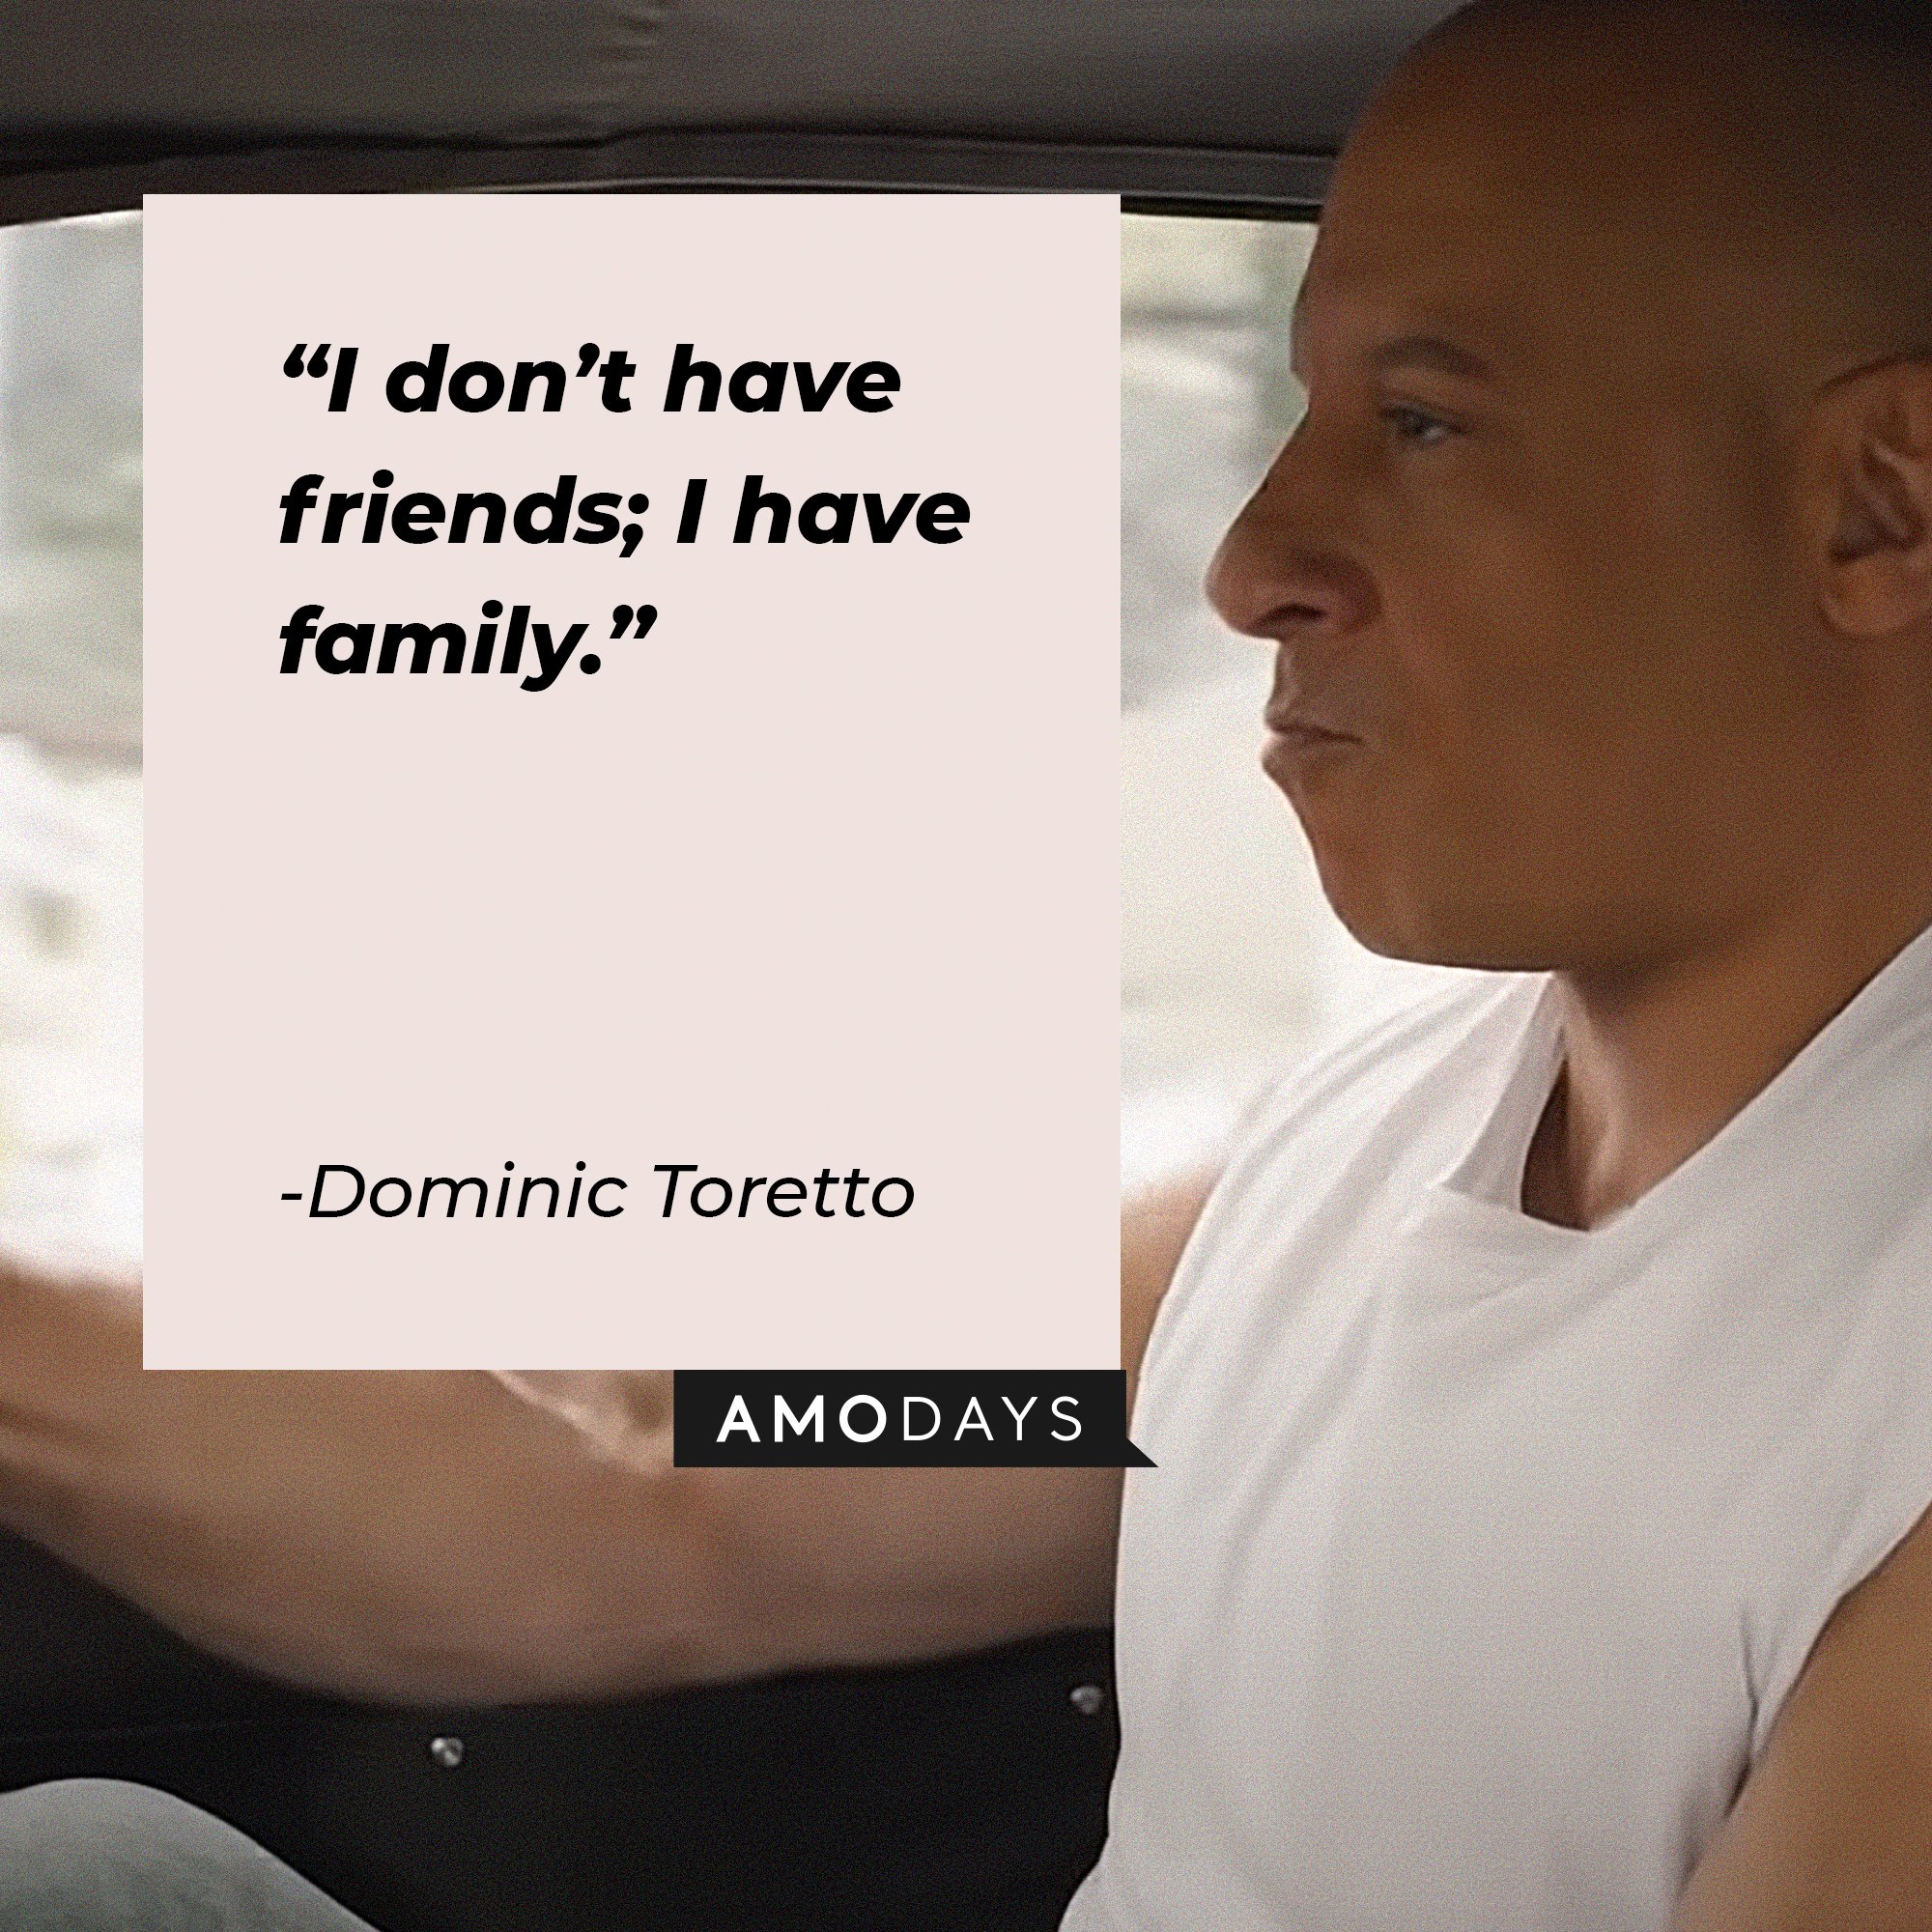 Dominic Toretto’s quote: “I don’t have friends; I have family.” │Image: AmoDays